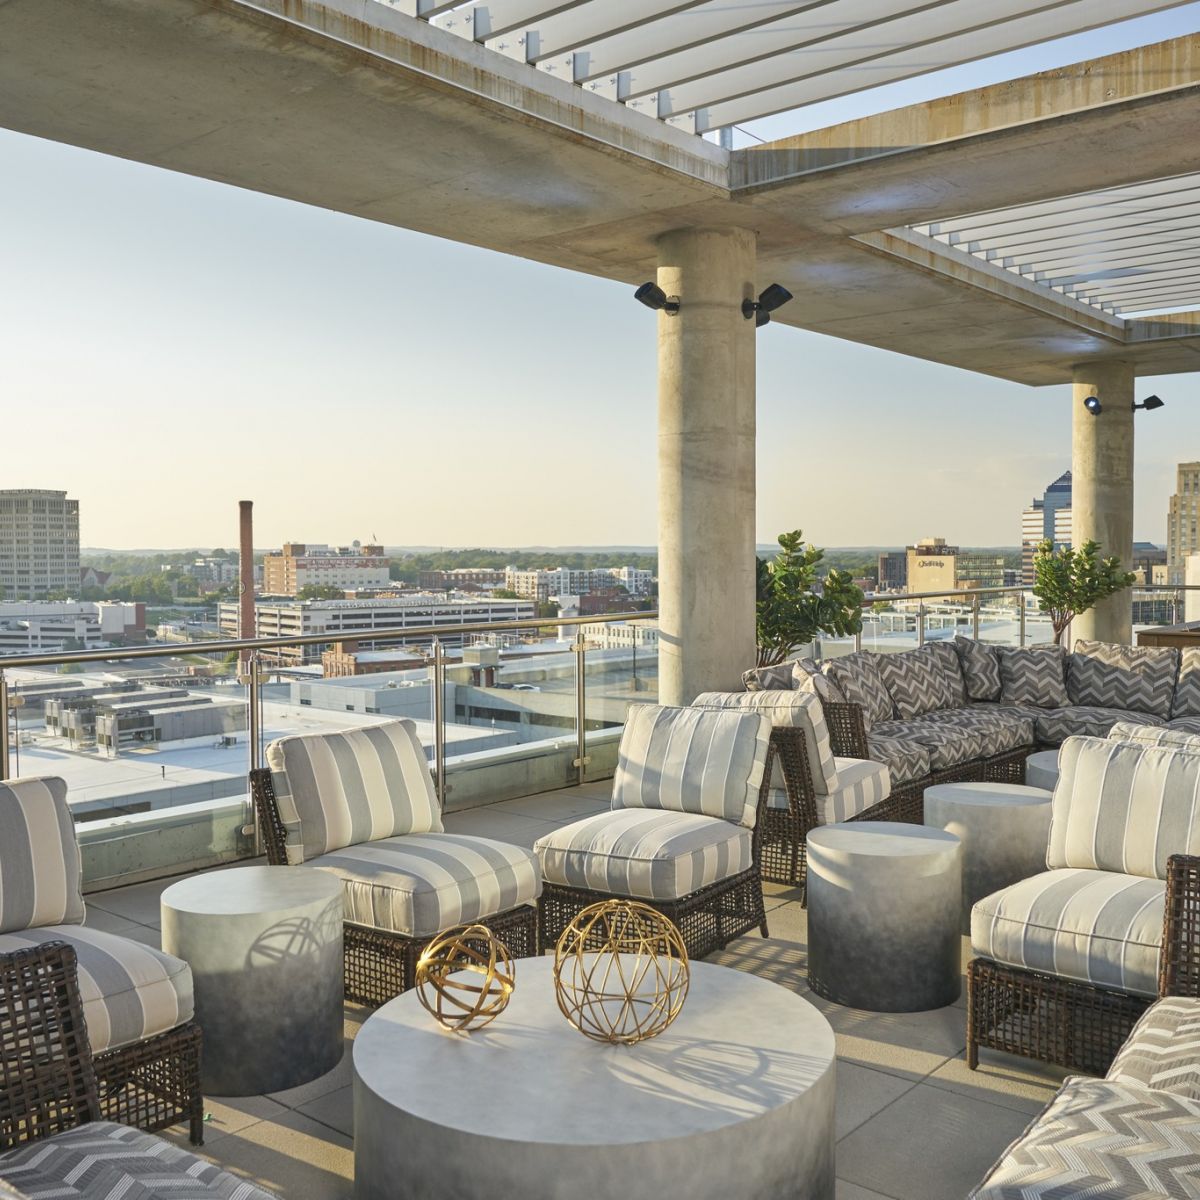 Van Alen apartments building rooftop viewing deck with plenty of lounge seating and 360 views